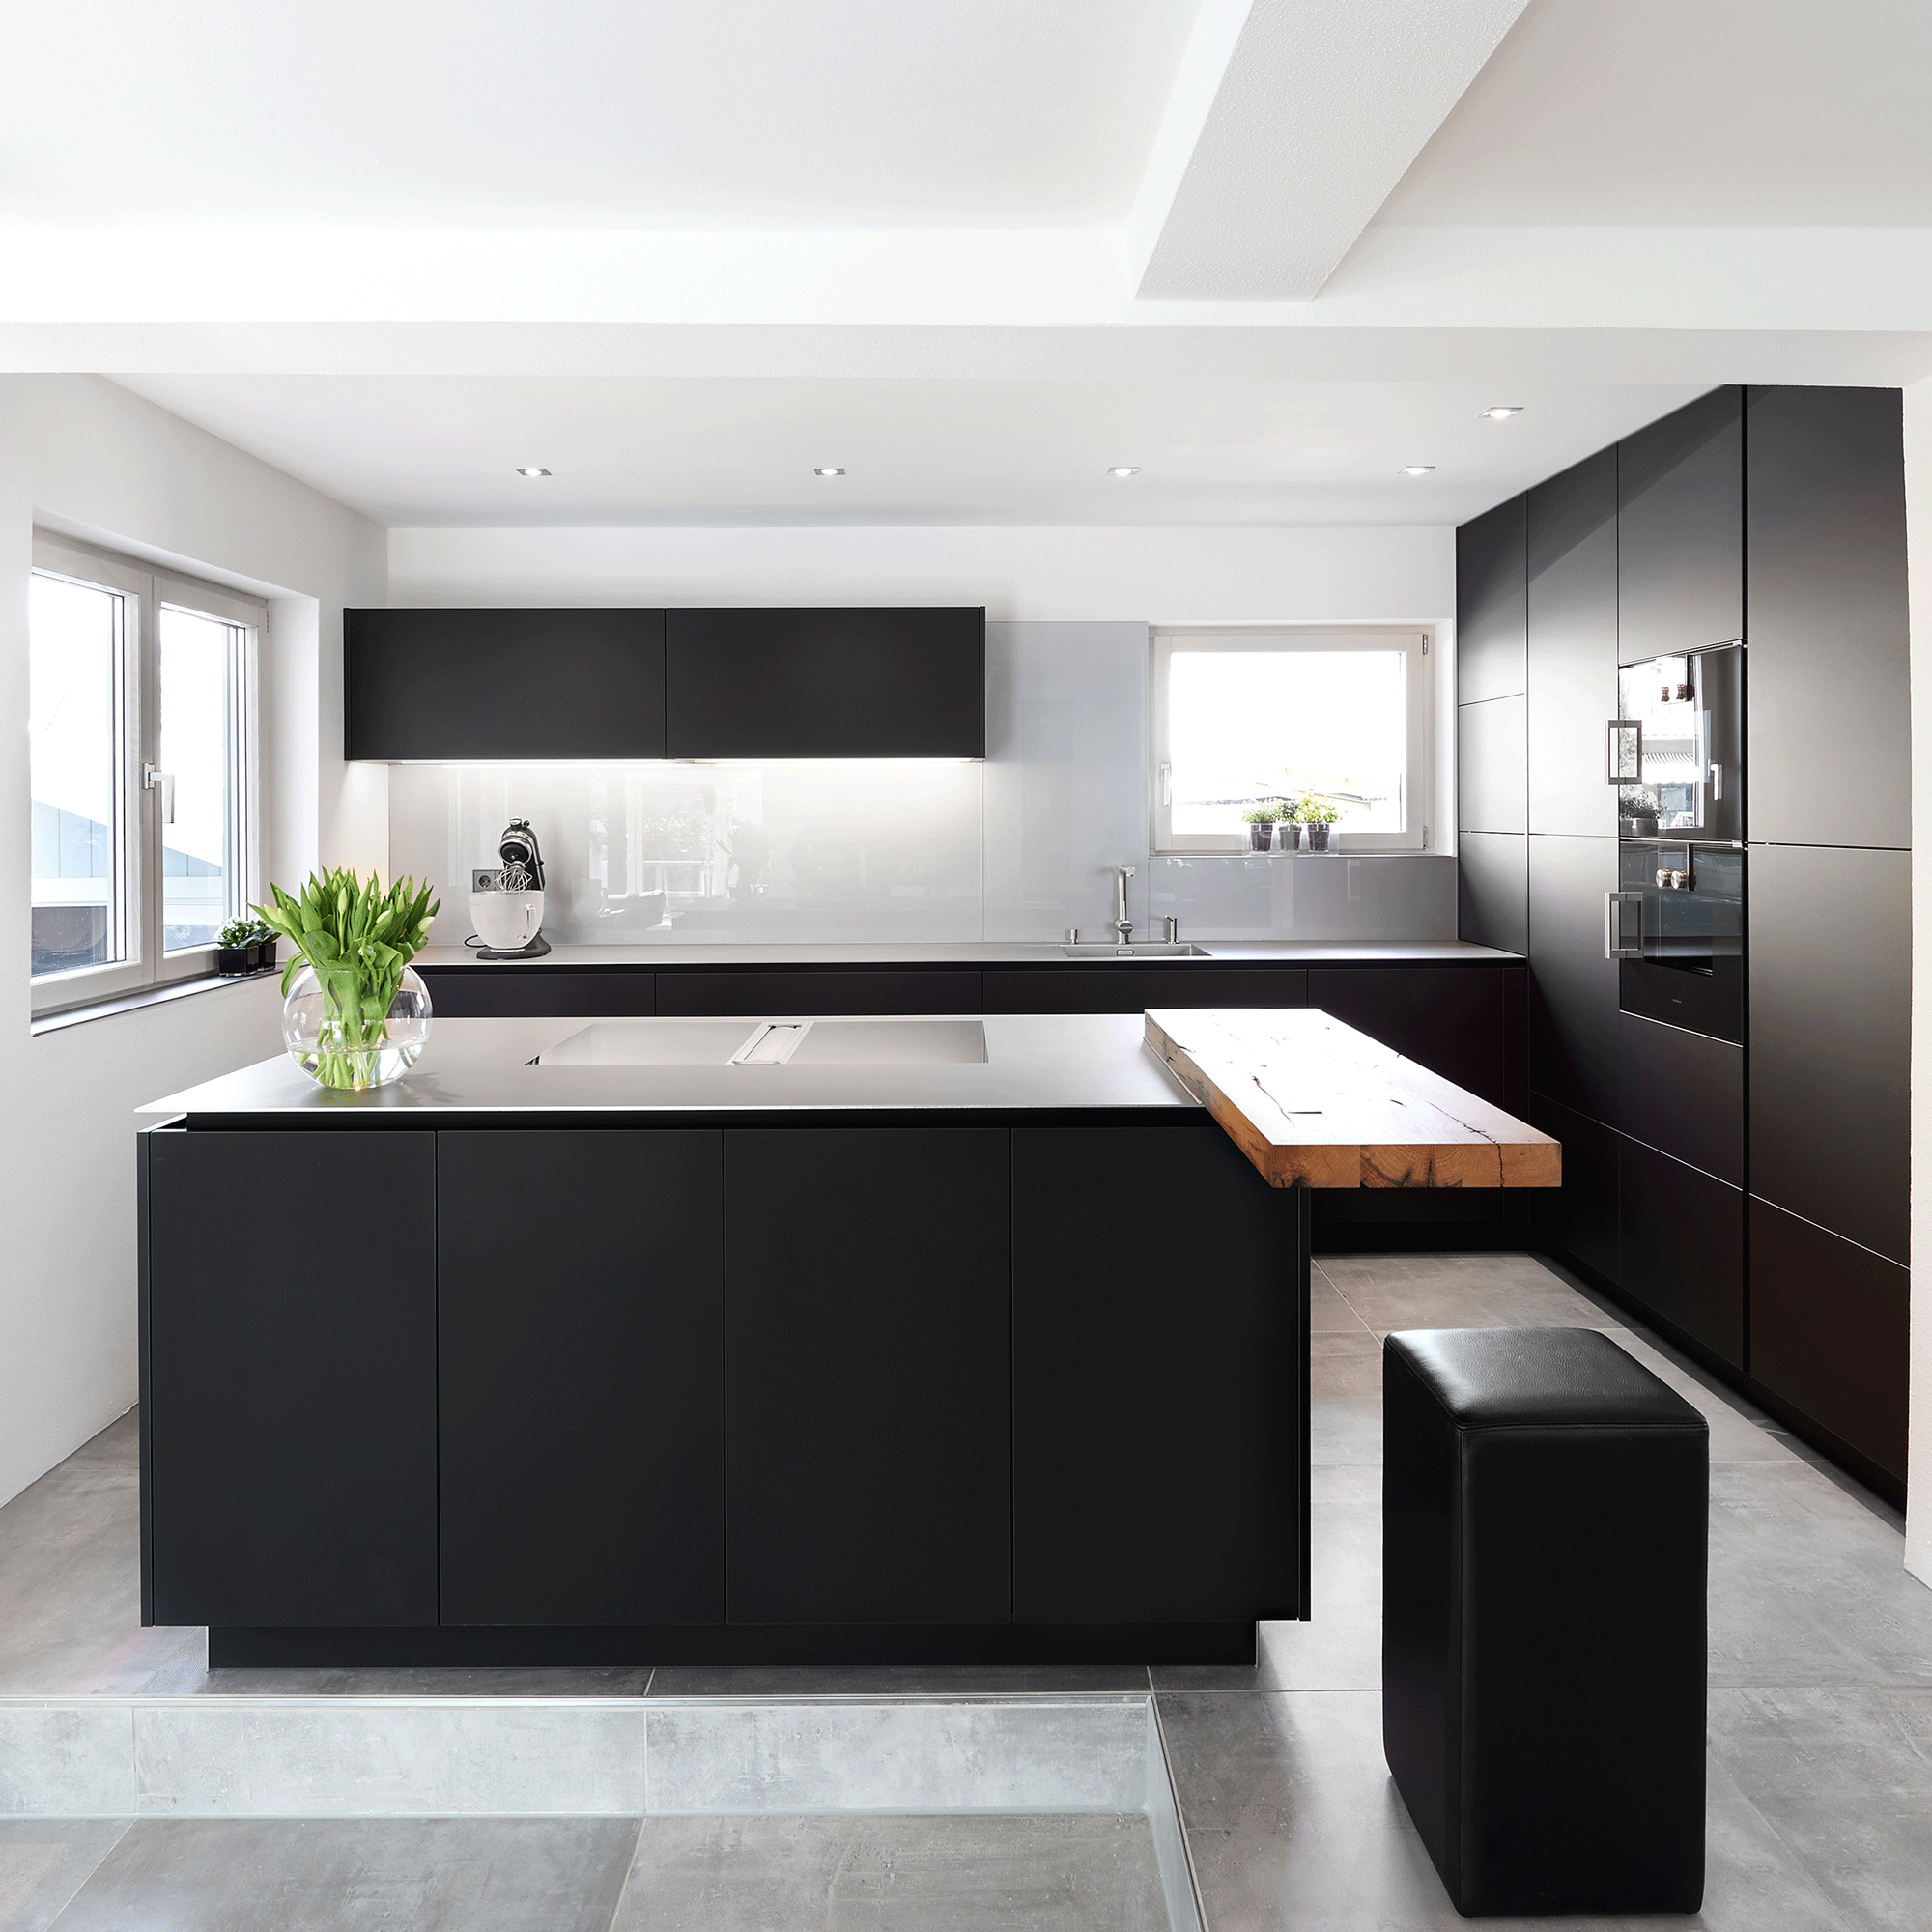 Dark kitchen with a perched wooden counter on the island